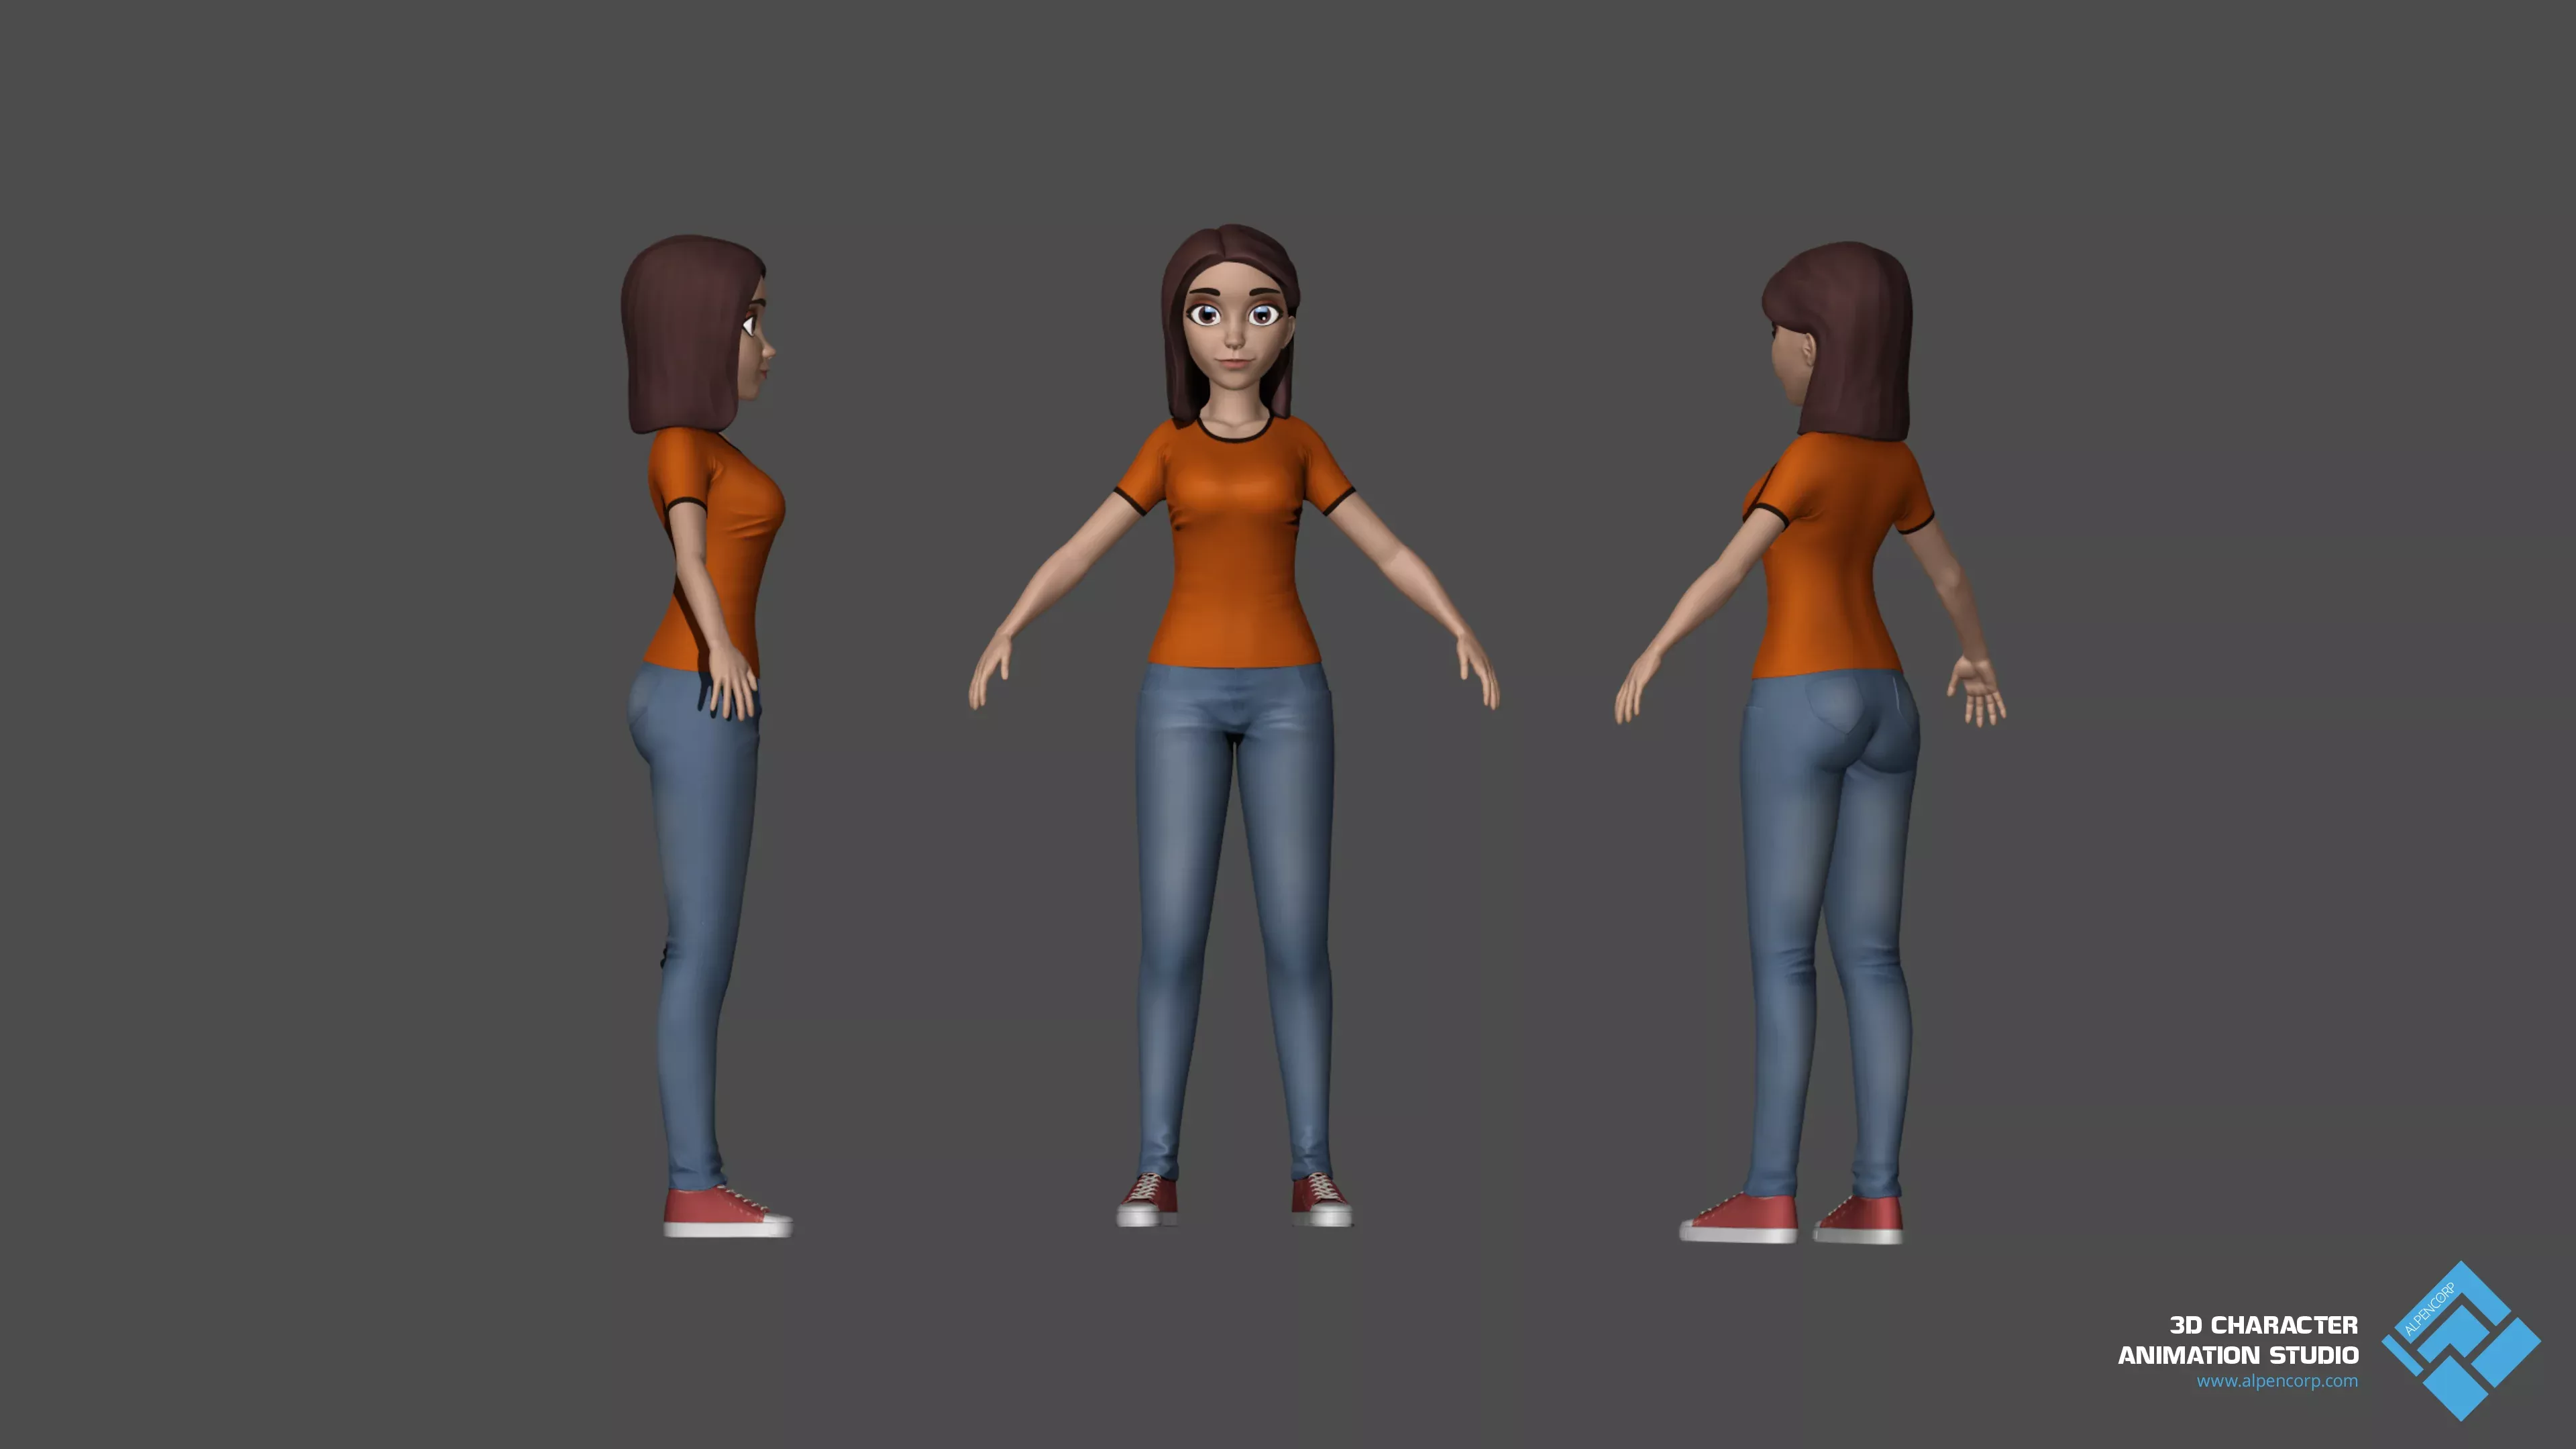 Clothes and design of the 3D Character for eShop